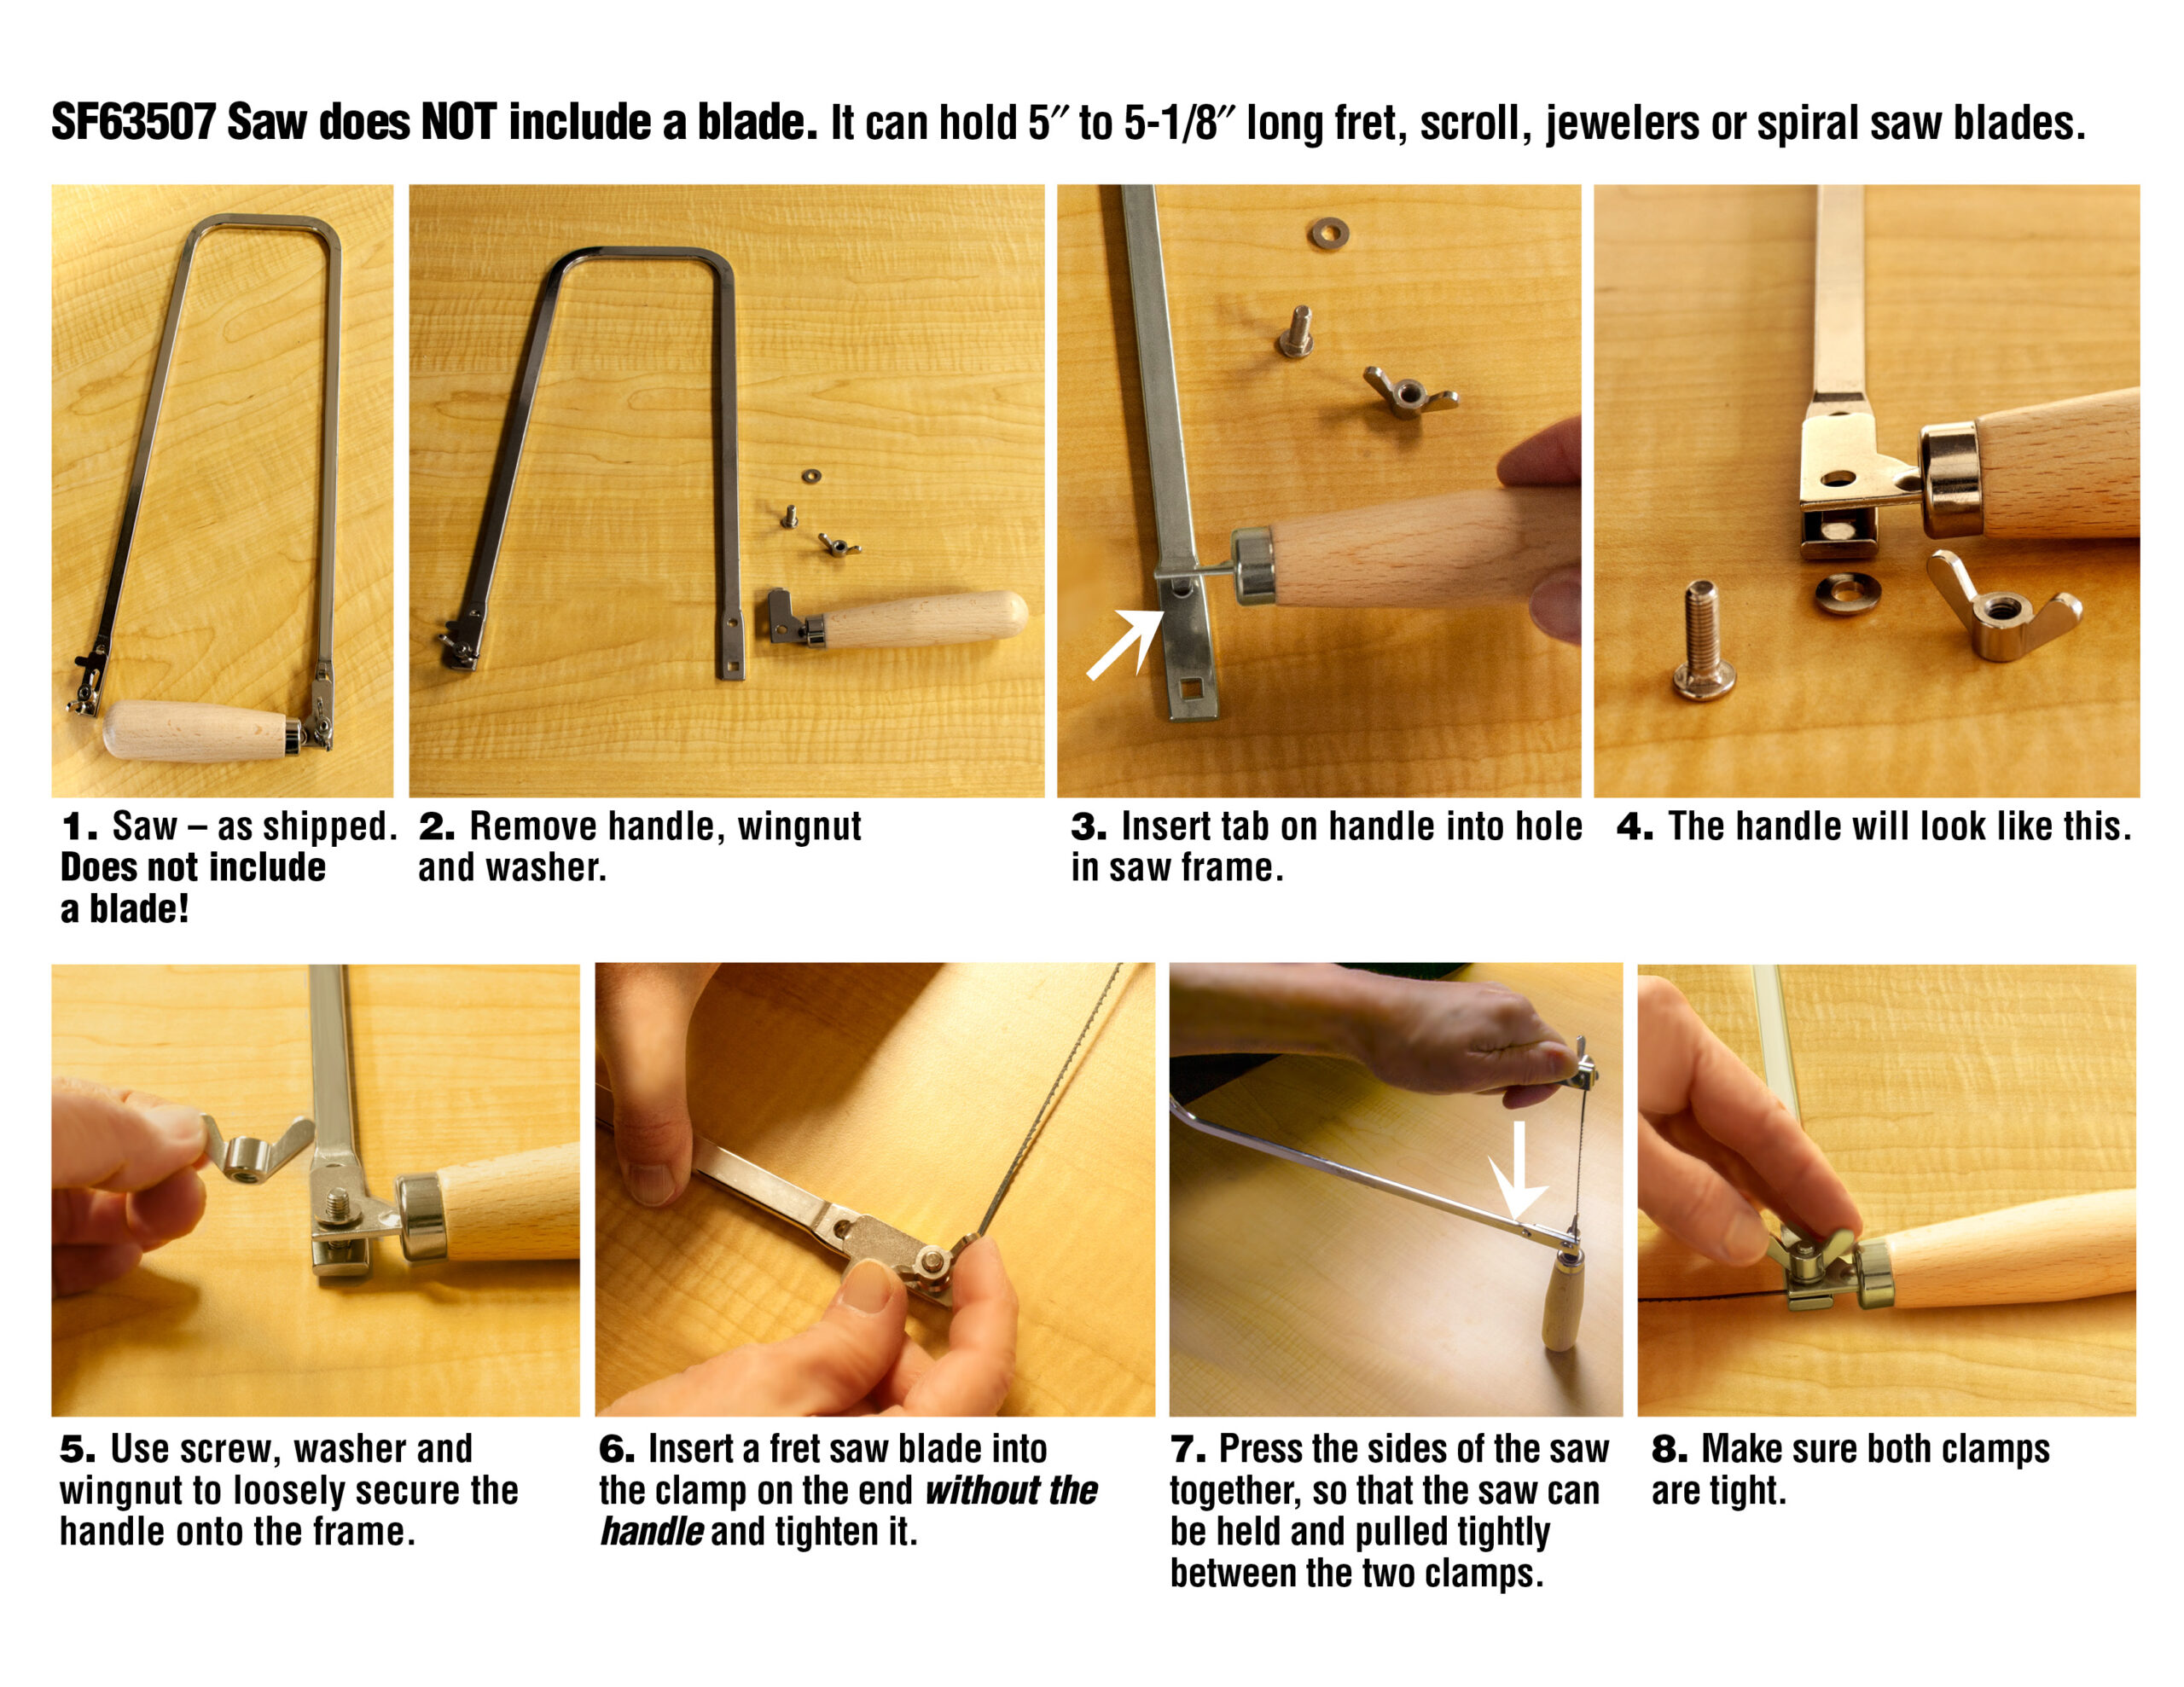 How To Make A Scroll Saw From A Coping Saw A Simple Guide